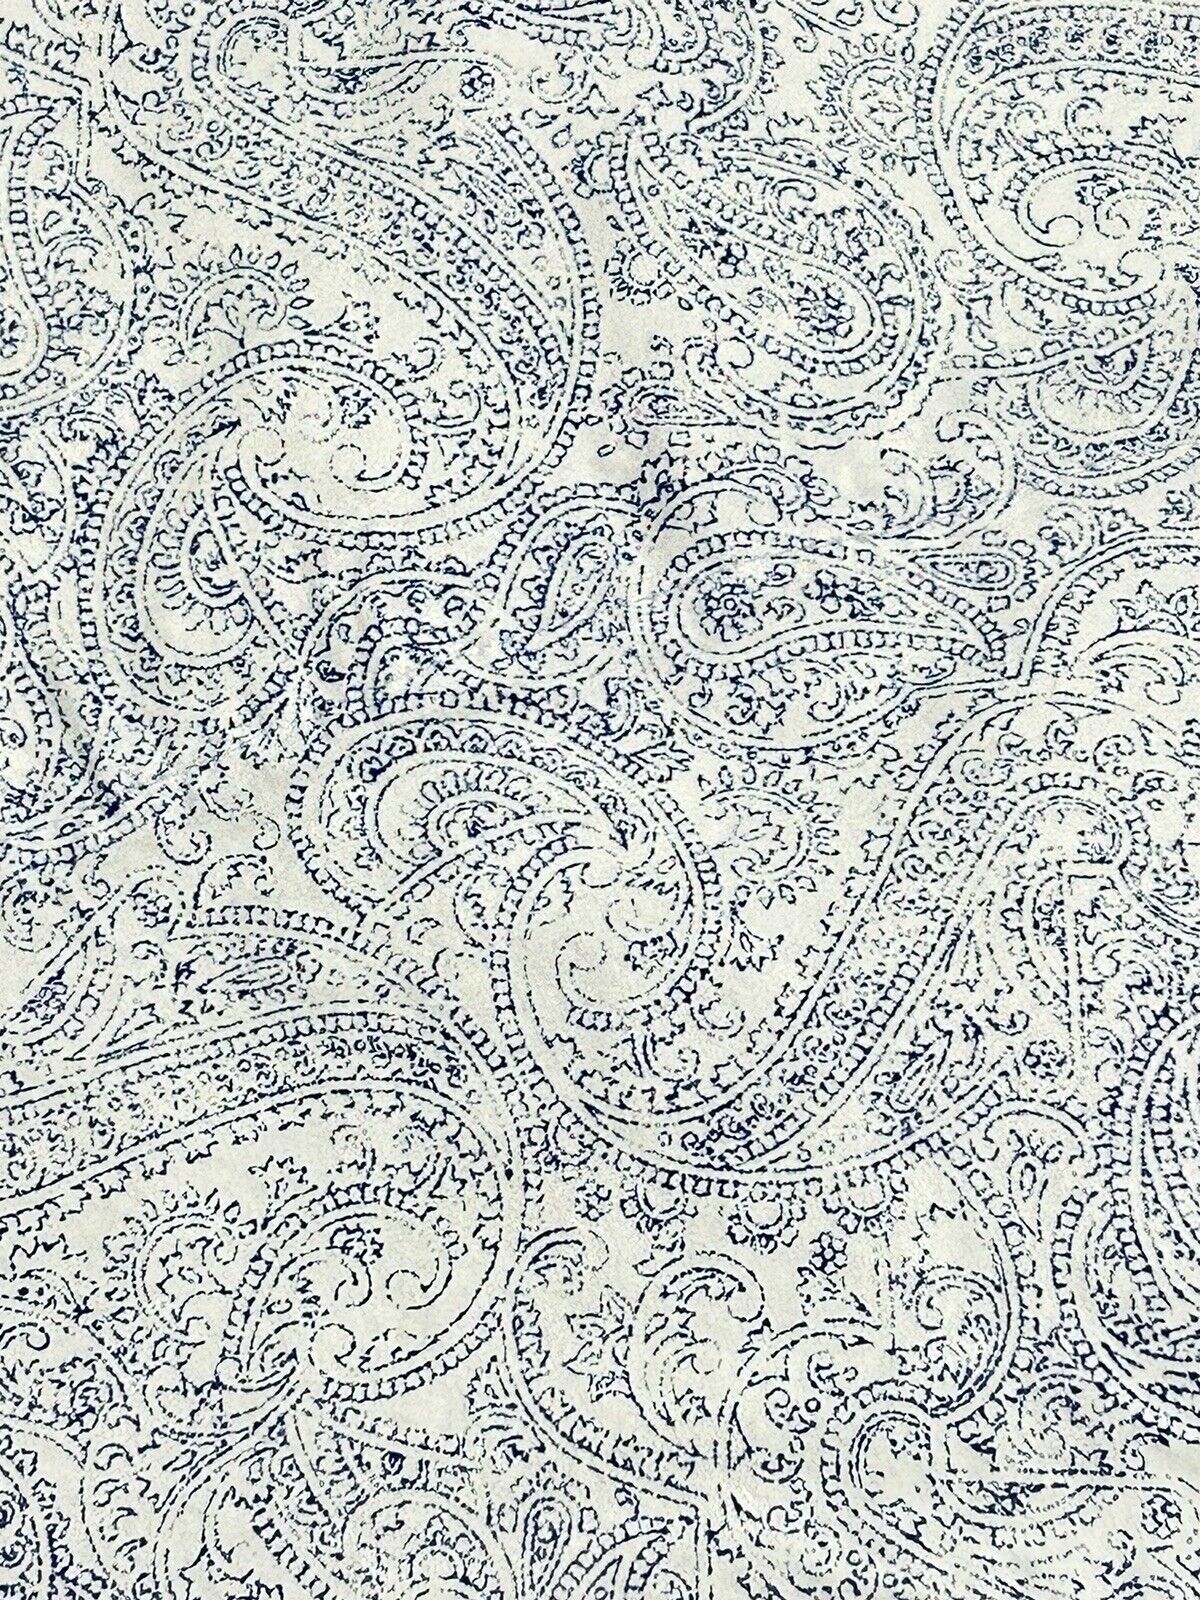 Ralph Lauren Full Sheets Fitted & Flat Blue Paisley on White Background - $60.78